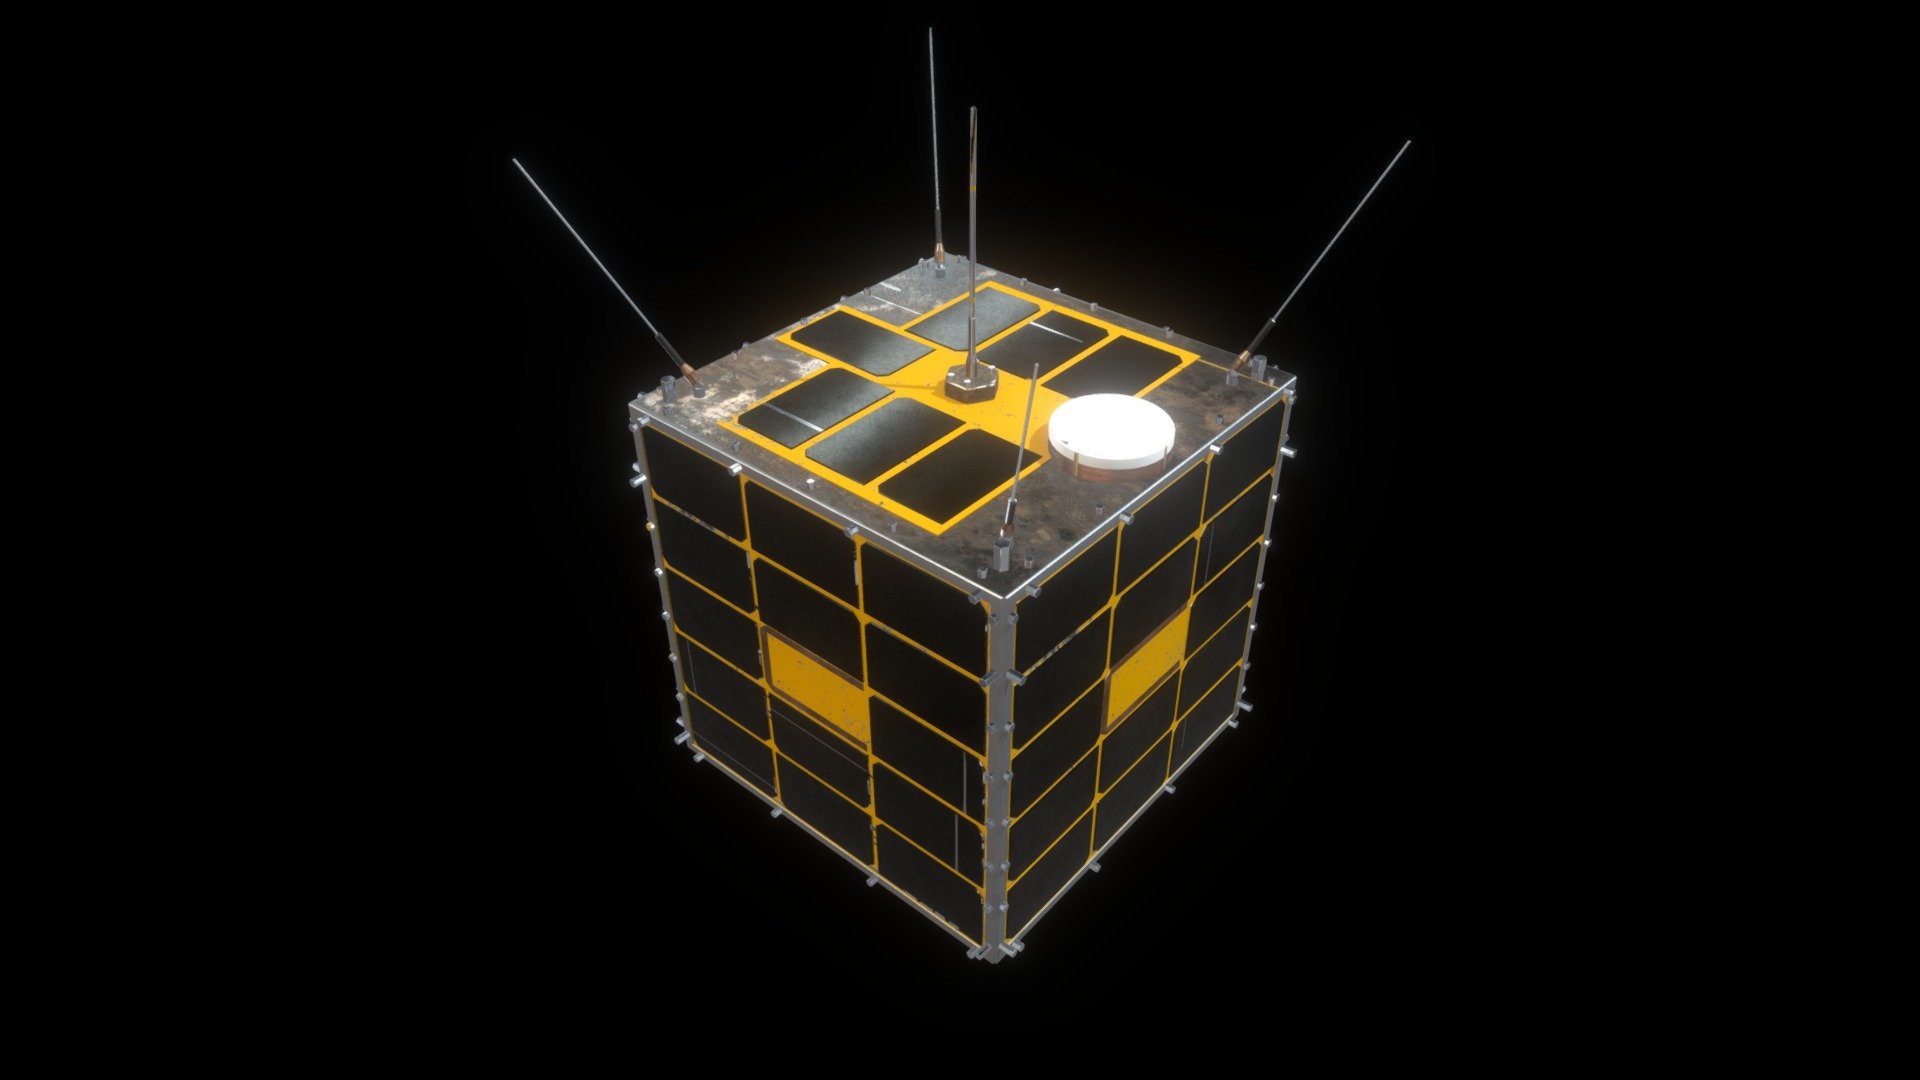 AprizeSat is an American micro-satellite platform for low Earth orbit communications satellites. It is marketed as a low-cost solution, with a claimed cost of US$1.2 million per satellite for a 24-to-48-satellite constellation 3d model